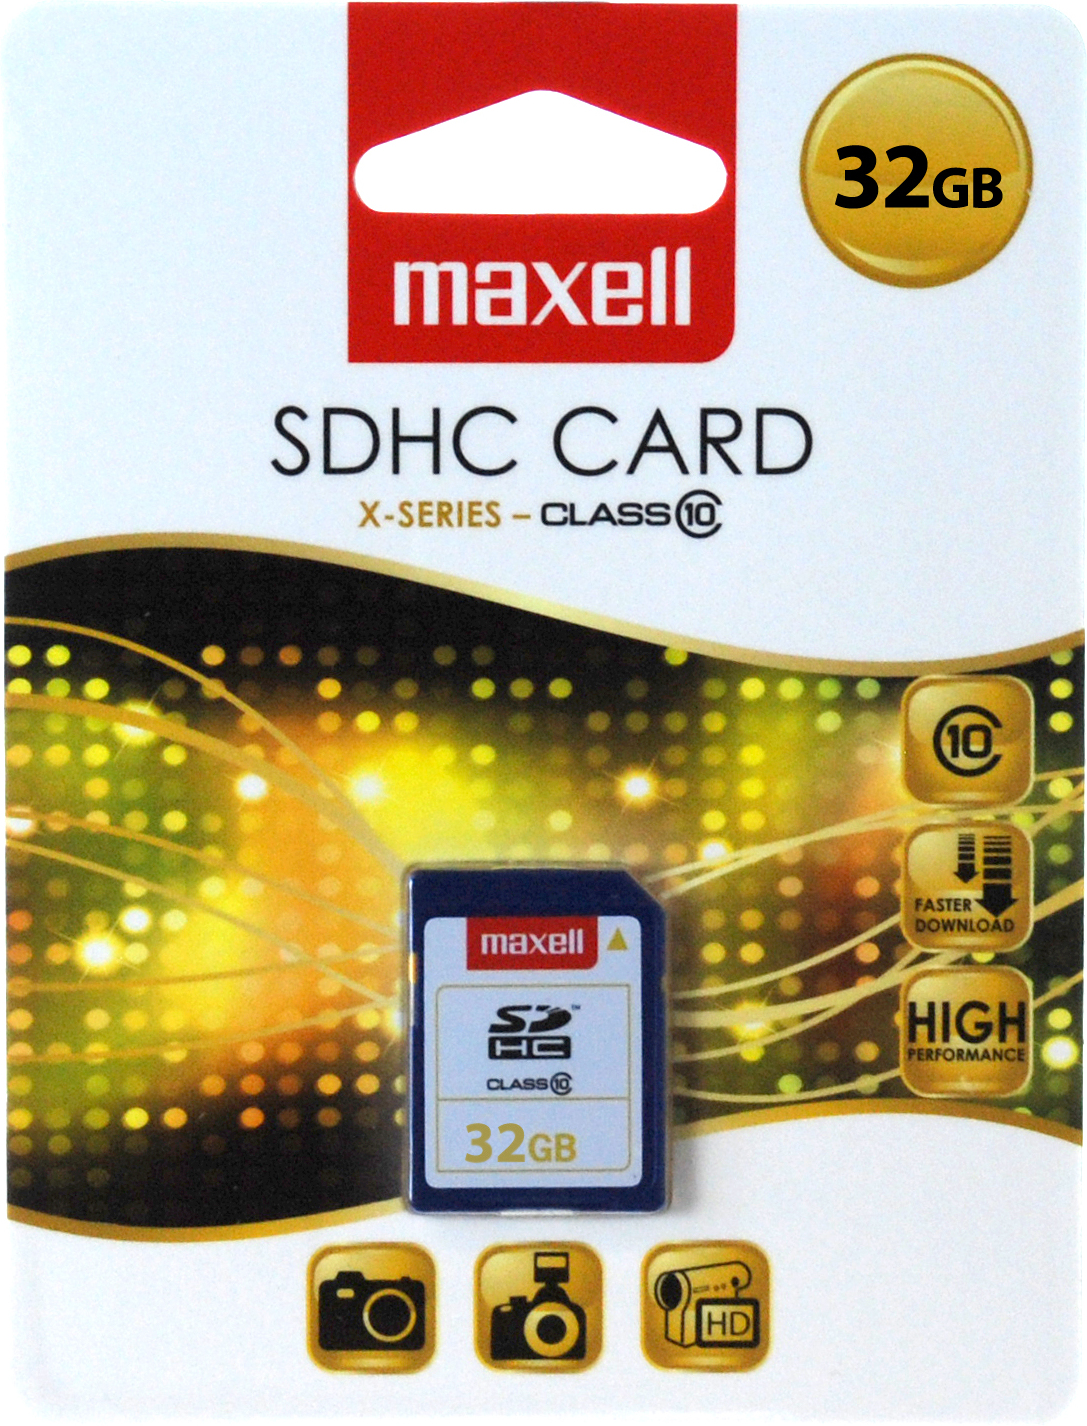 Maxell Sdhc 32gb Class 10 - Ordinateur - Main picture